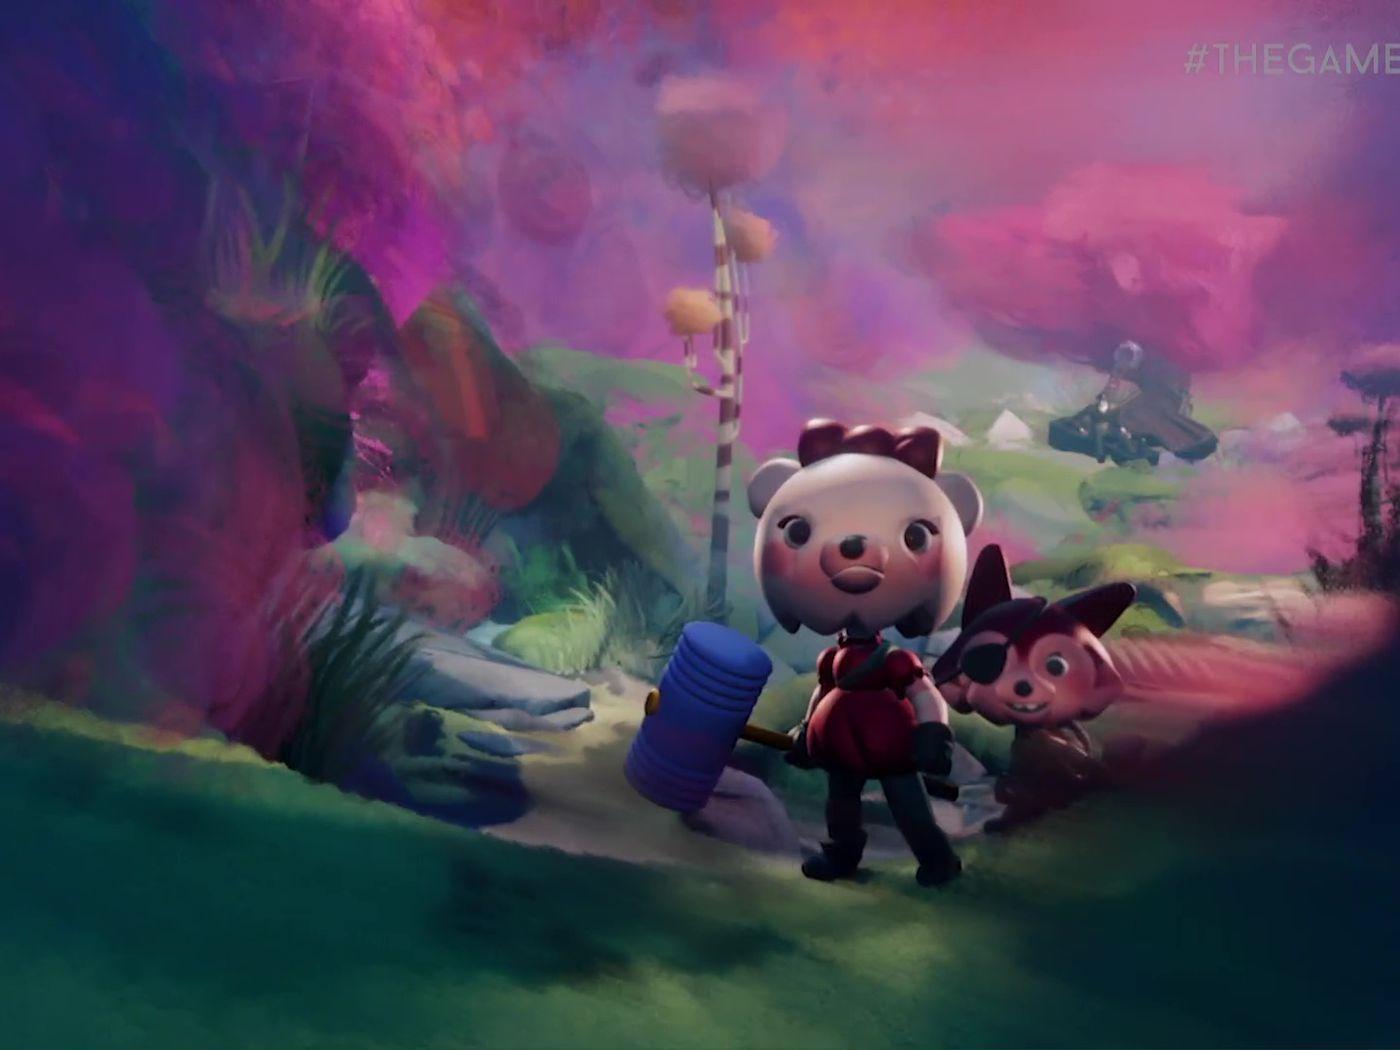 Dreams, from the makers of LittleBigPlanet, has a new trailer